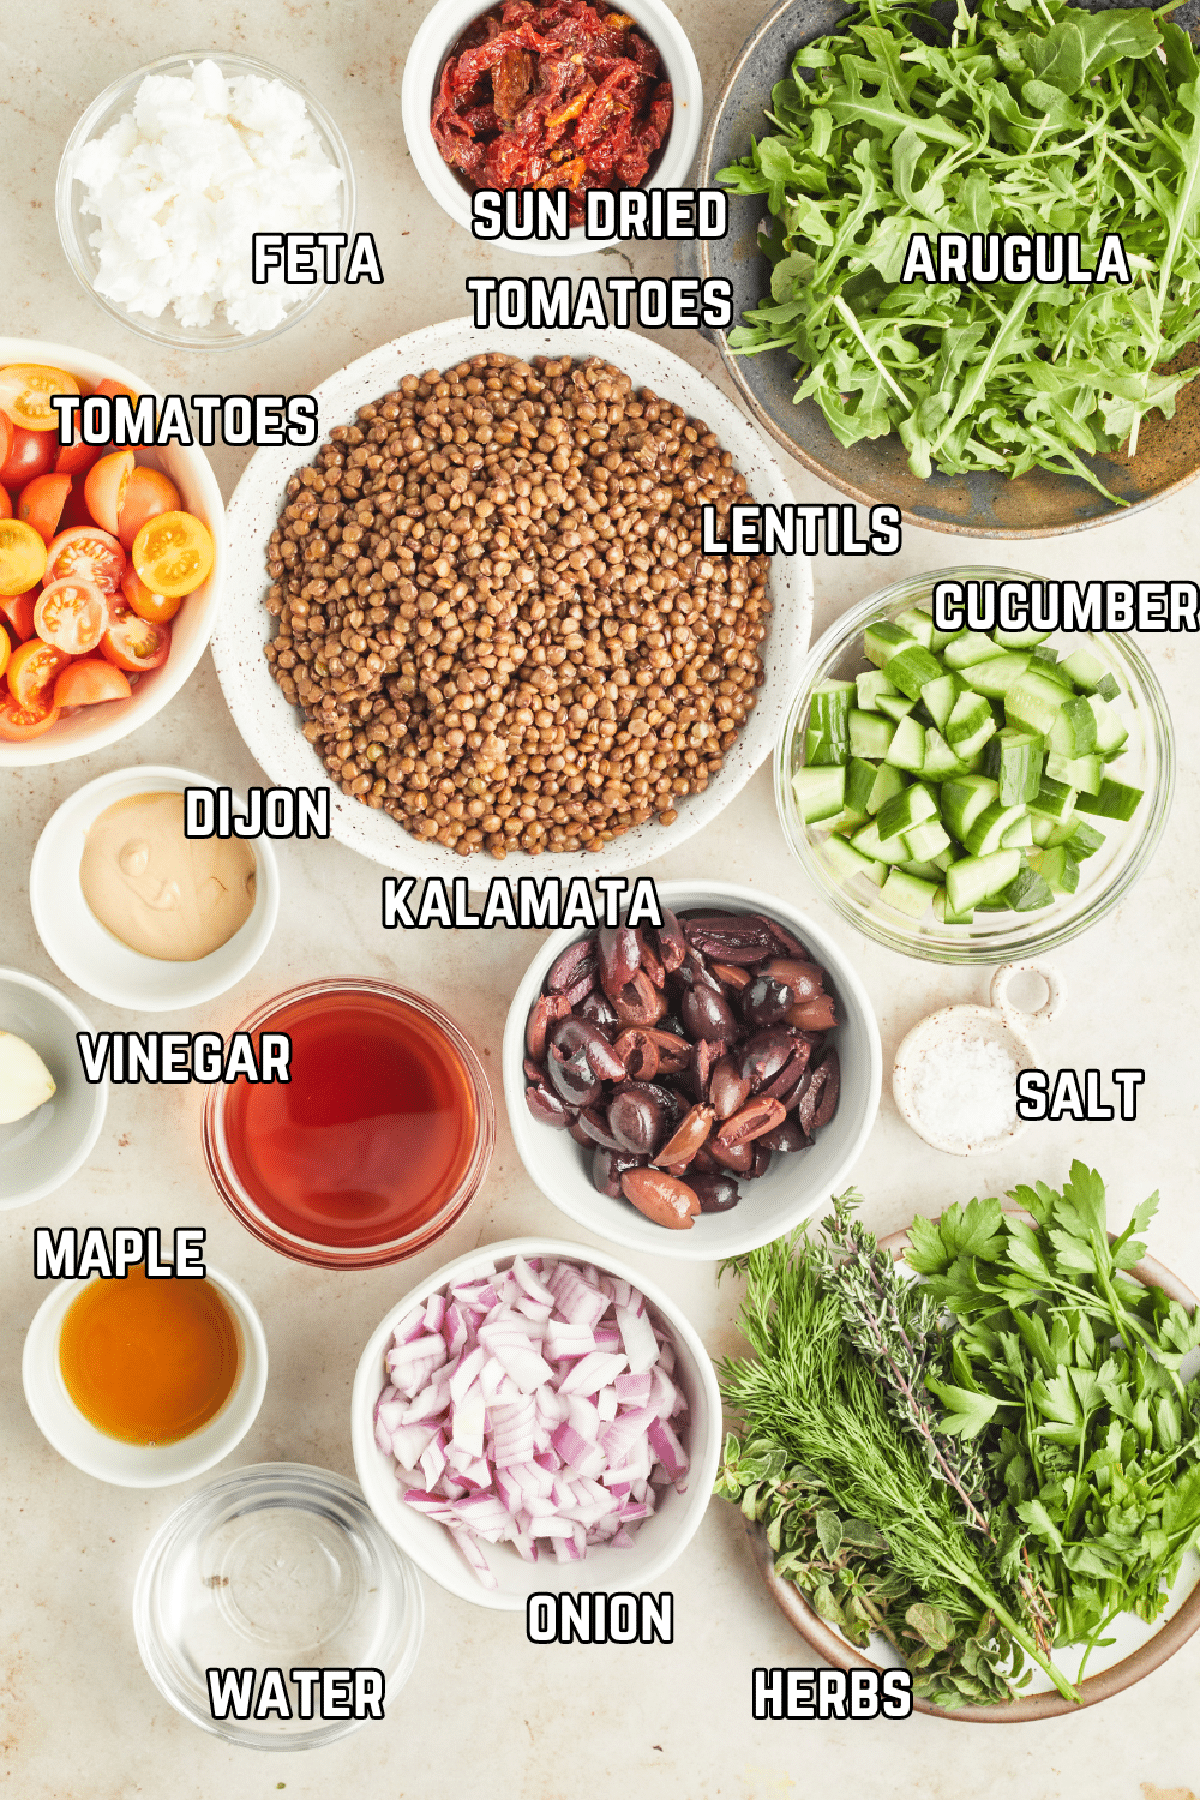 Overhead view of ingredient to make Mediterranean salad with lentils: crumbled feta, sun dried tomatoes, arugula, lentils, cucumber, tomatoes, Dijon, vinegar, kalamata olives, maple syrup, onion, fresh herbs, and water.